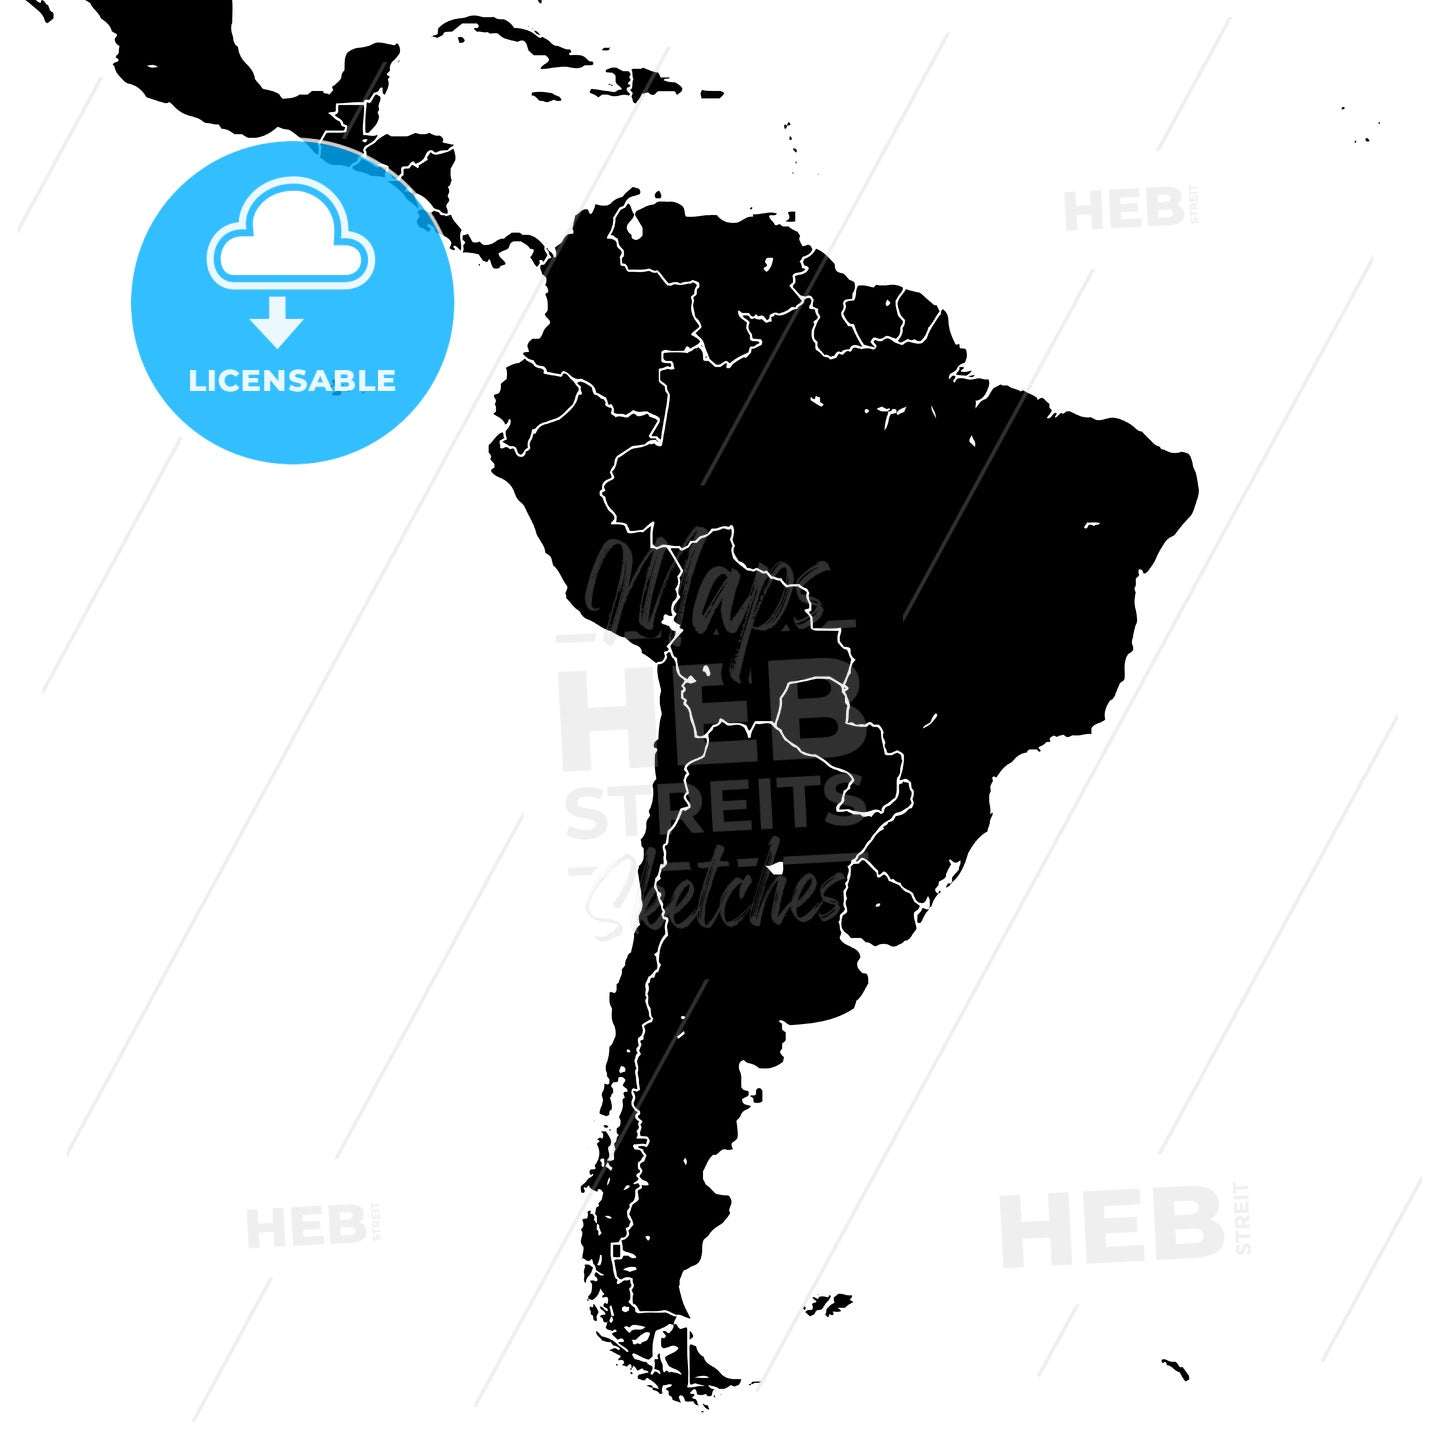 South America silhouette map